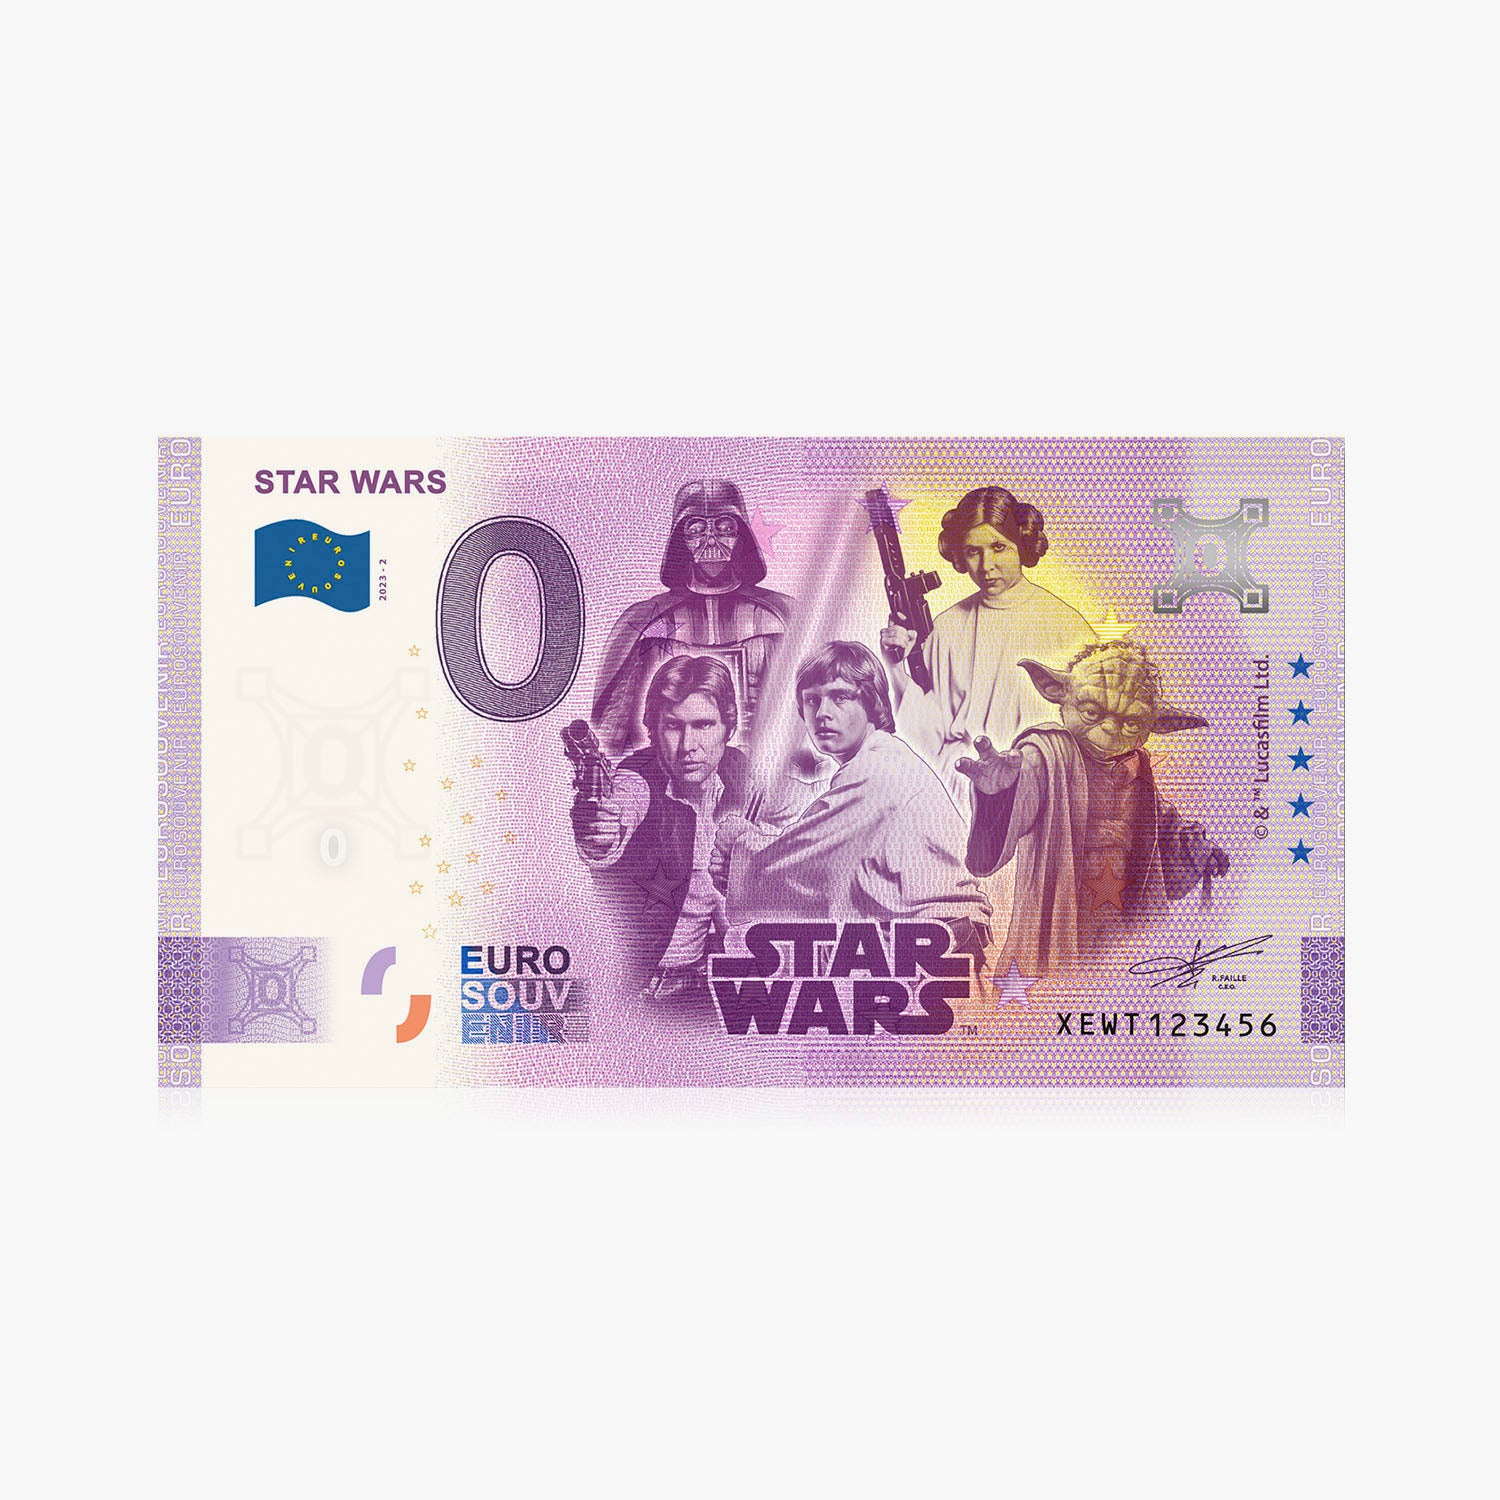 The Official Star Wars 0 Euro Banknote